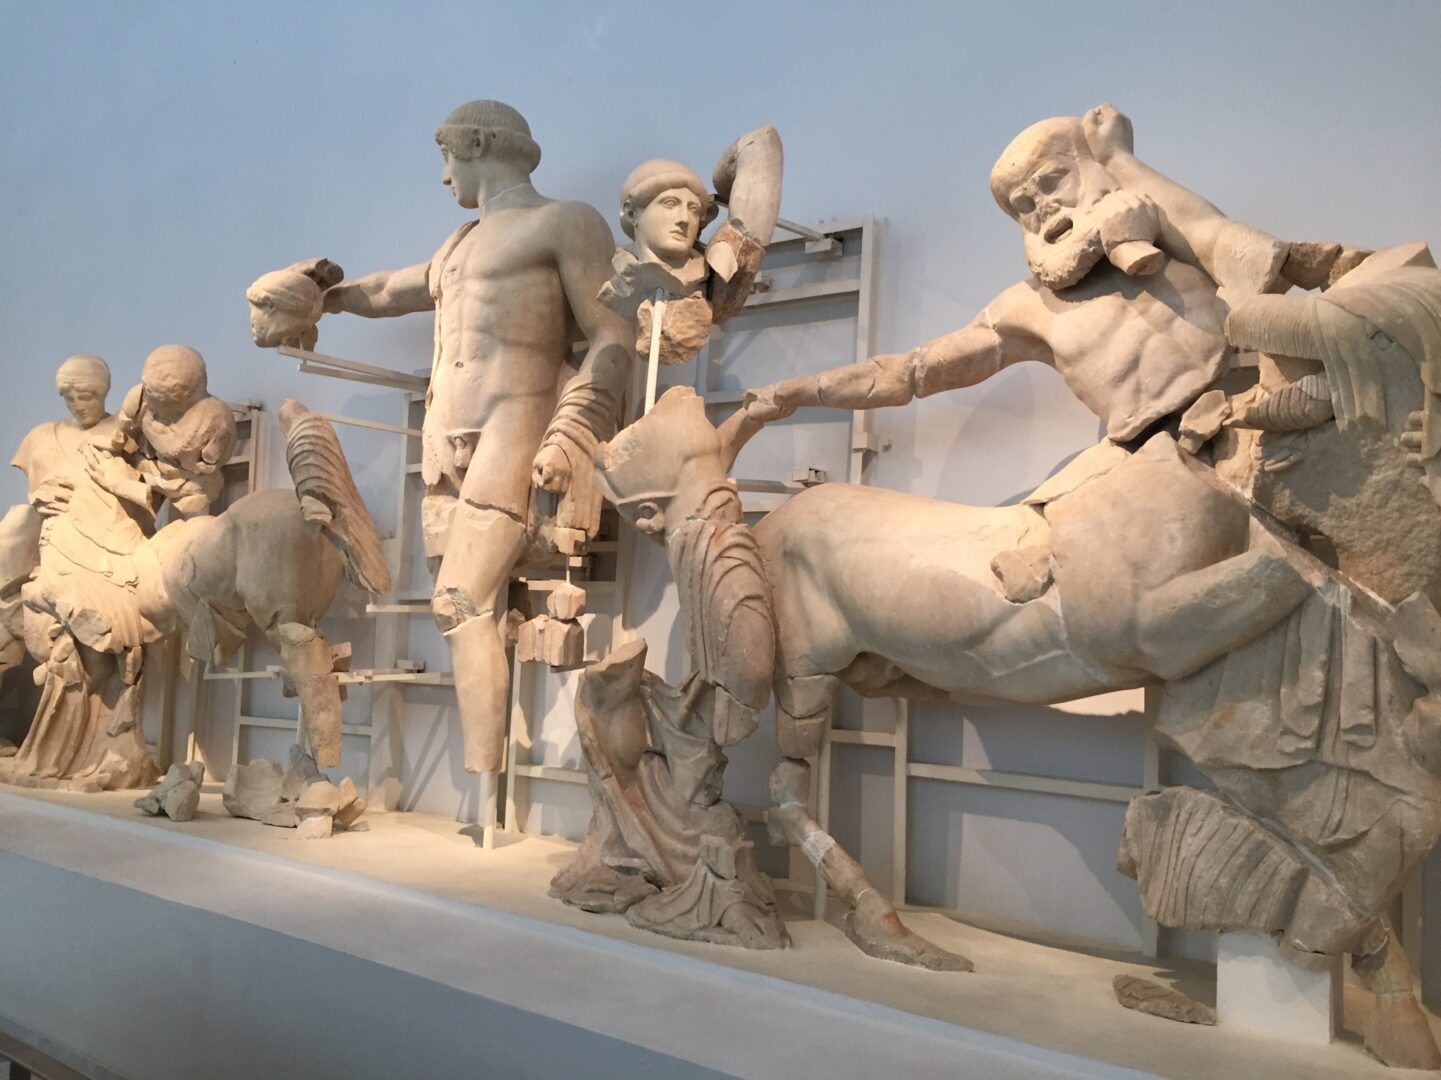 A group of statues on display in a museum.